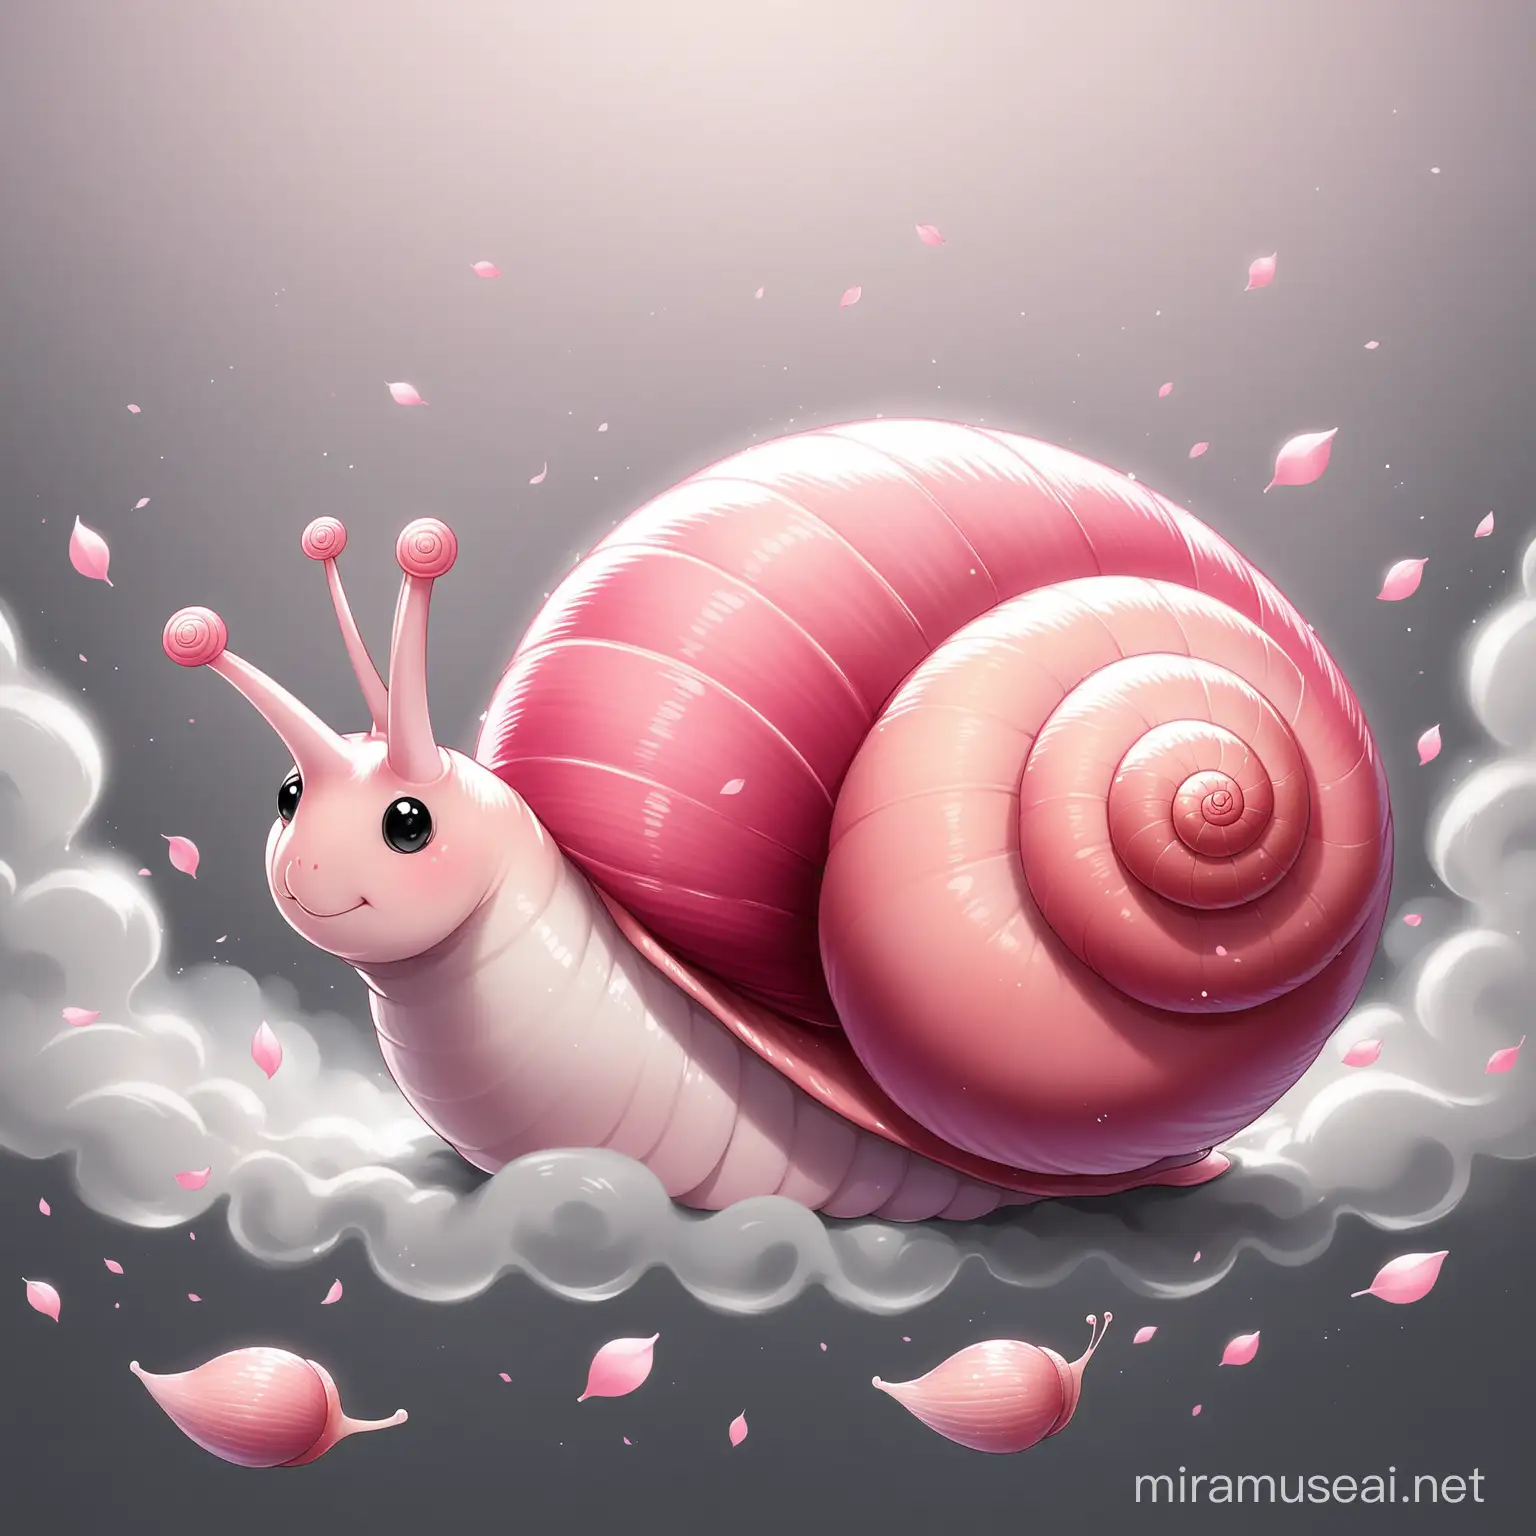 Adorable Pink Snail Surrounded by Grey Smoke and Falling Pink Petals